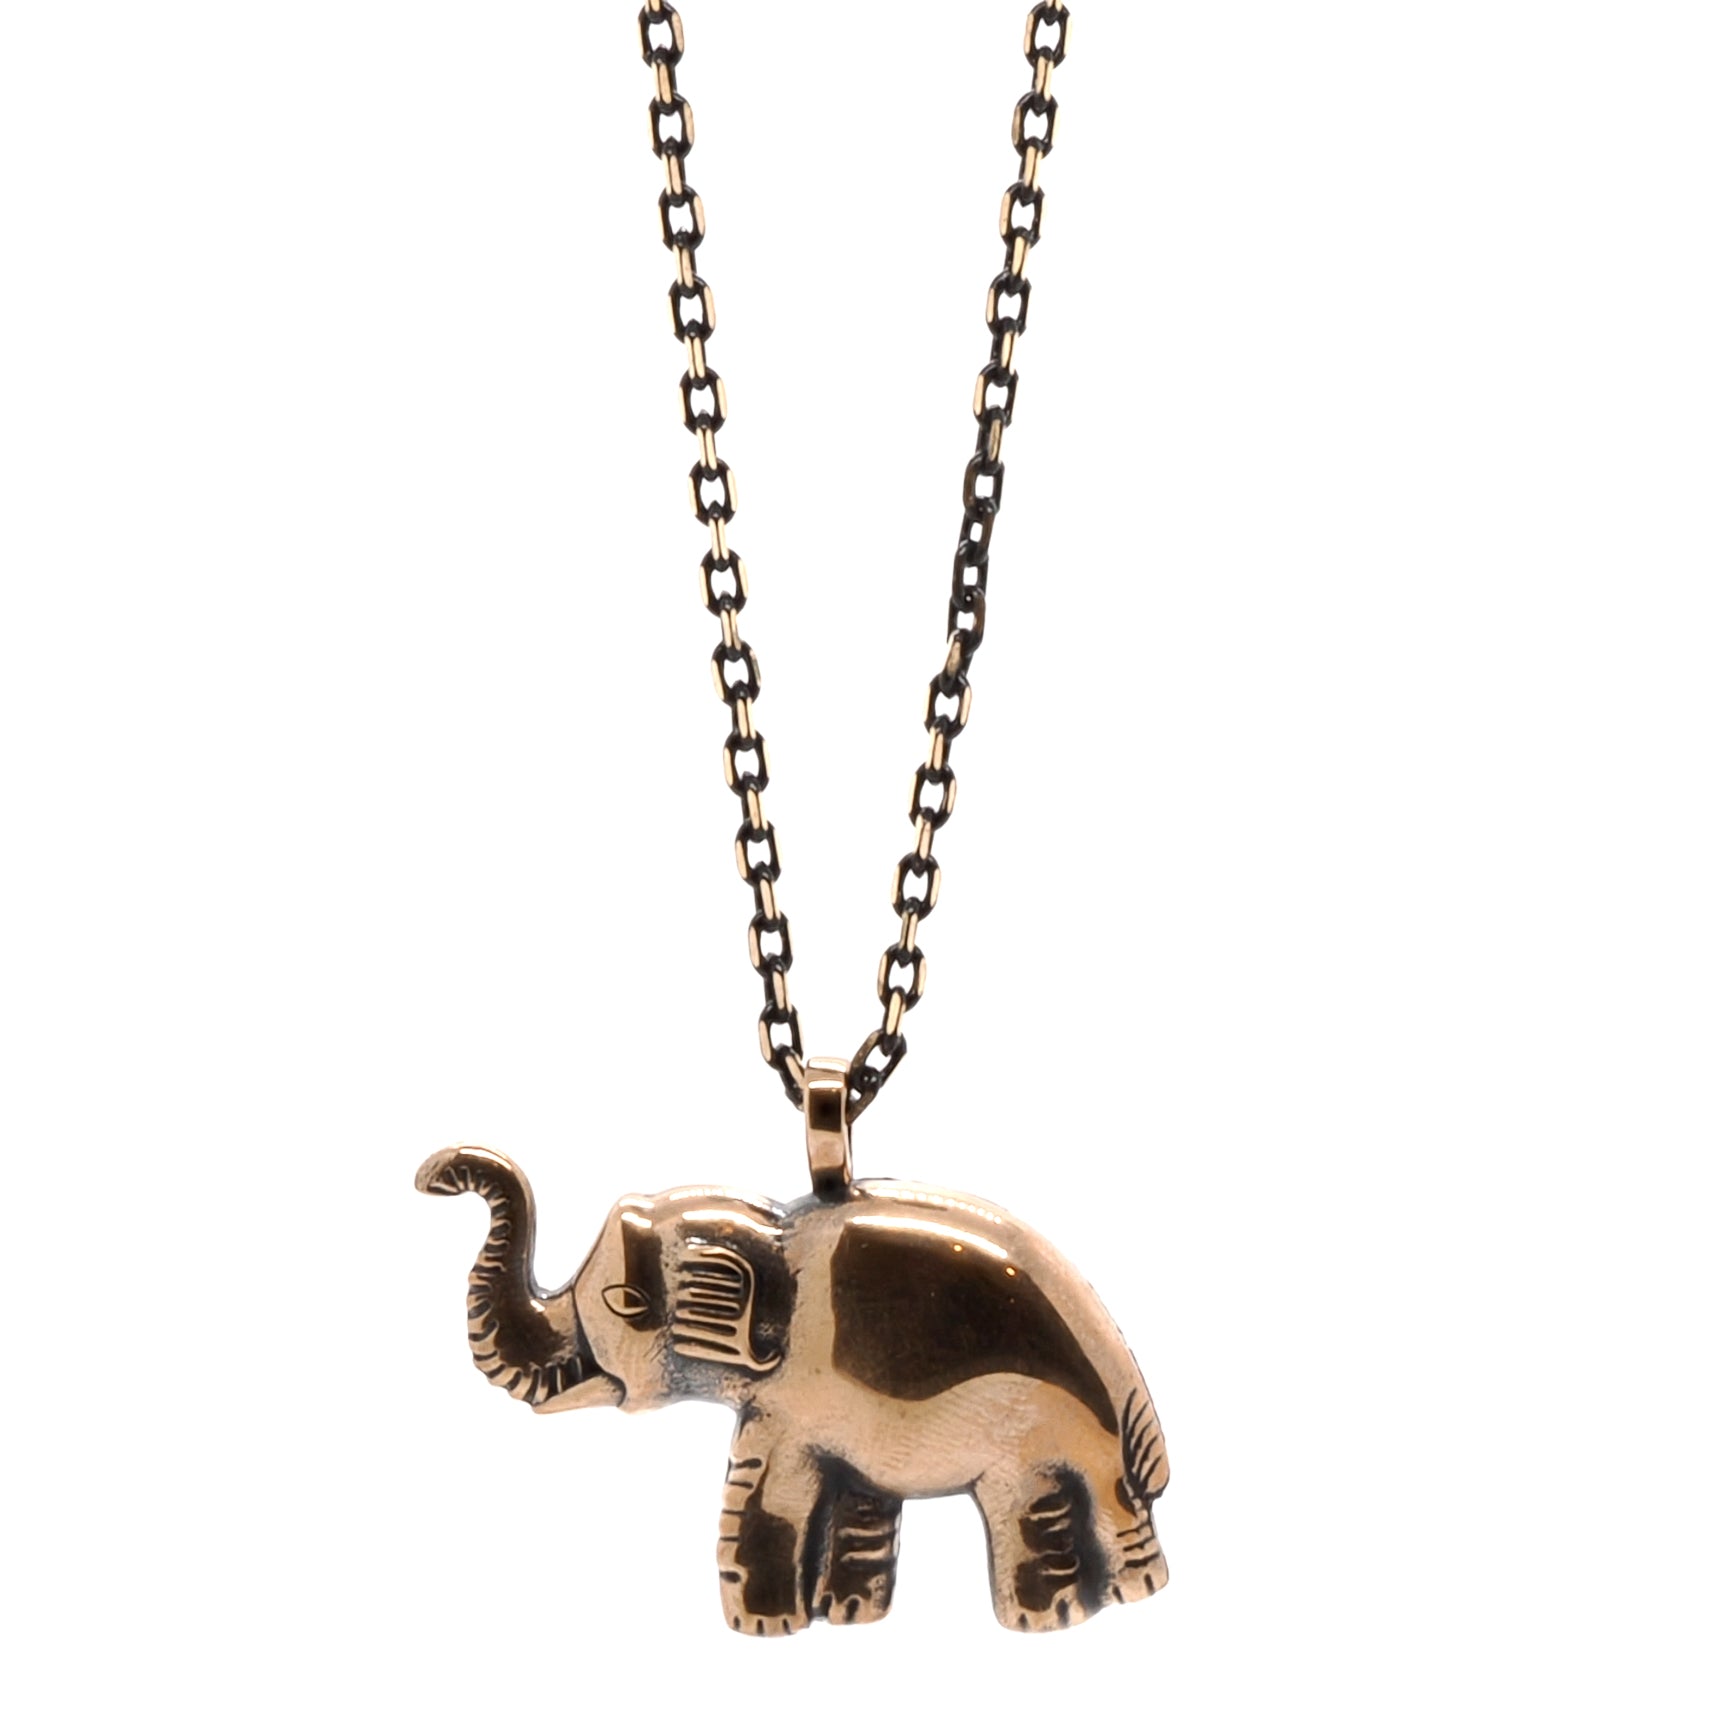 Symbol of Luck Elephant Necklace - Handcrafted Bronze Pendant on a Long Chain.